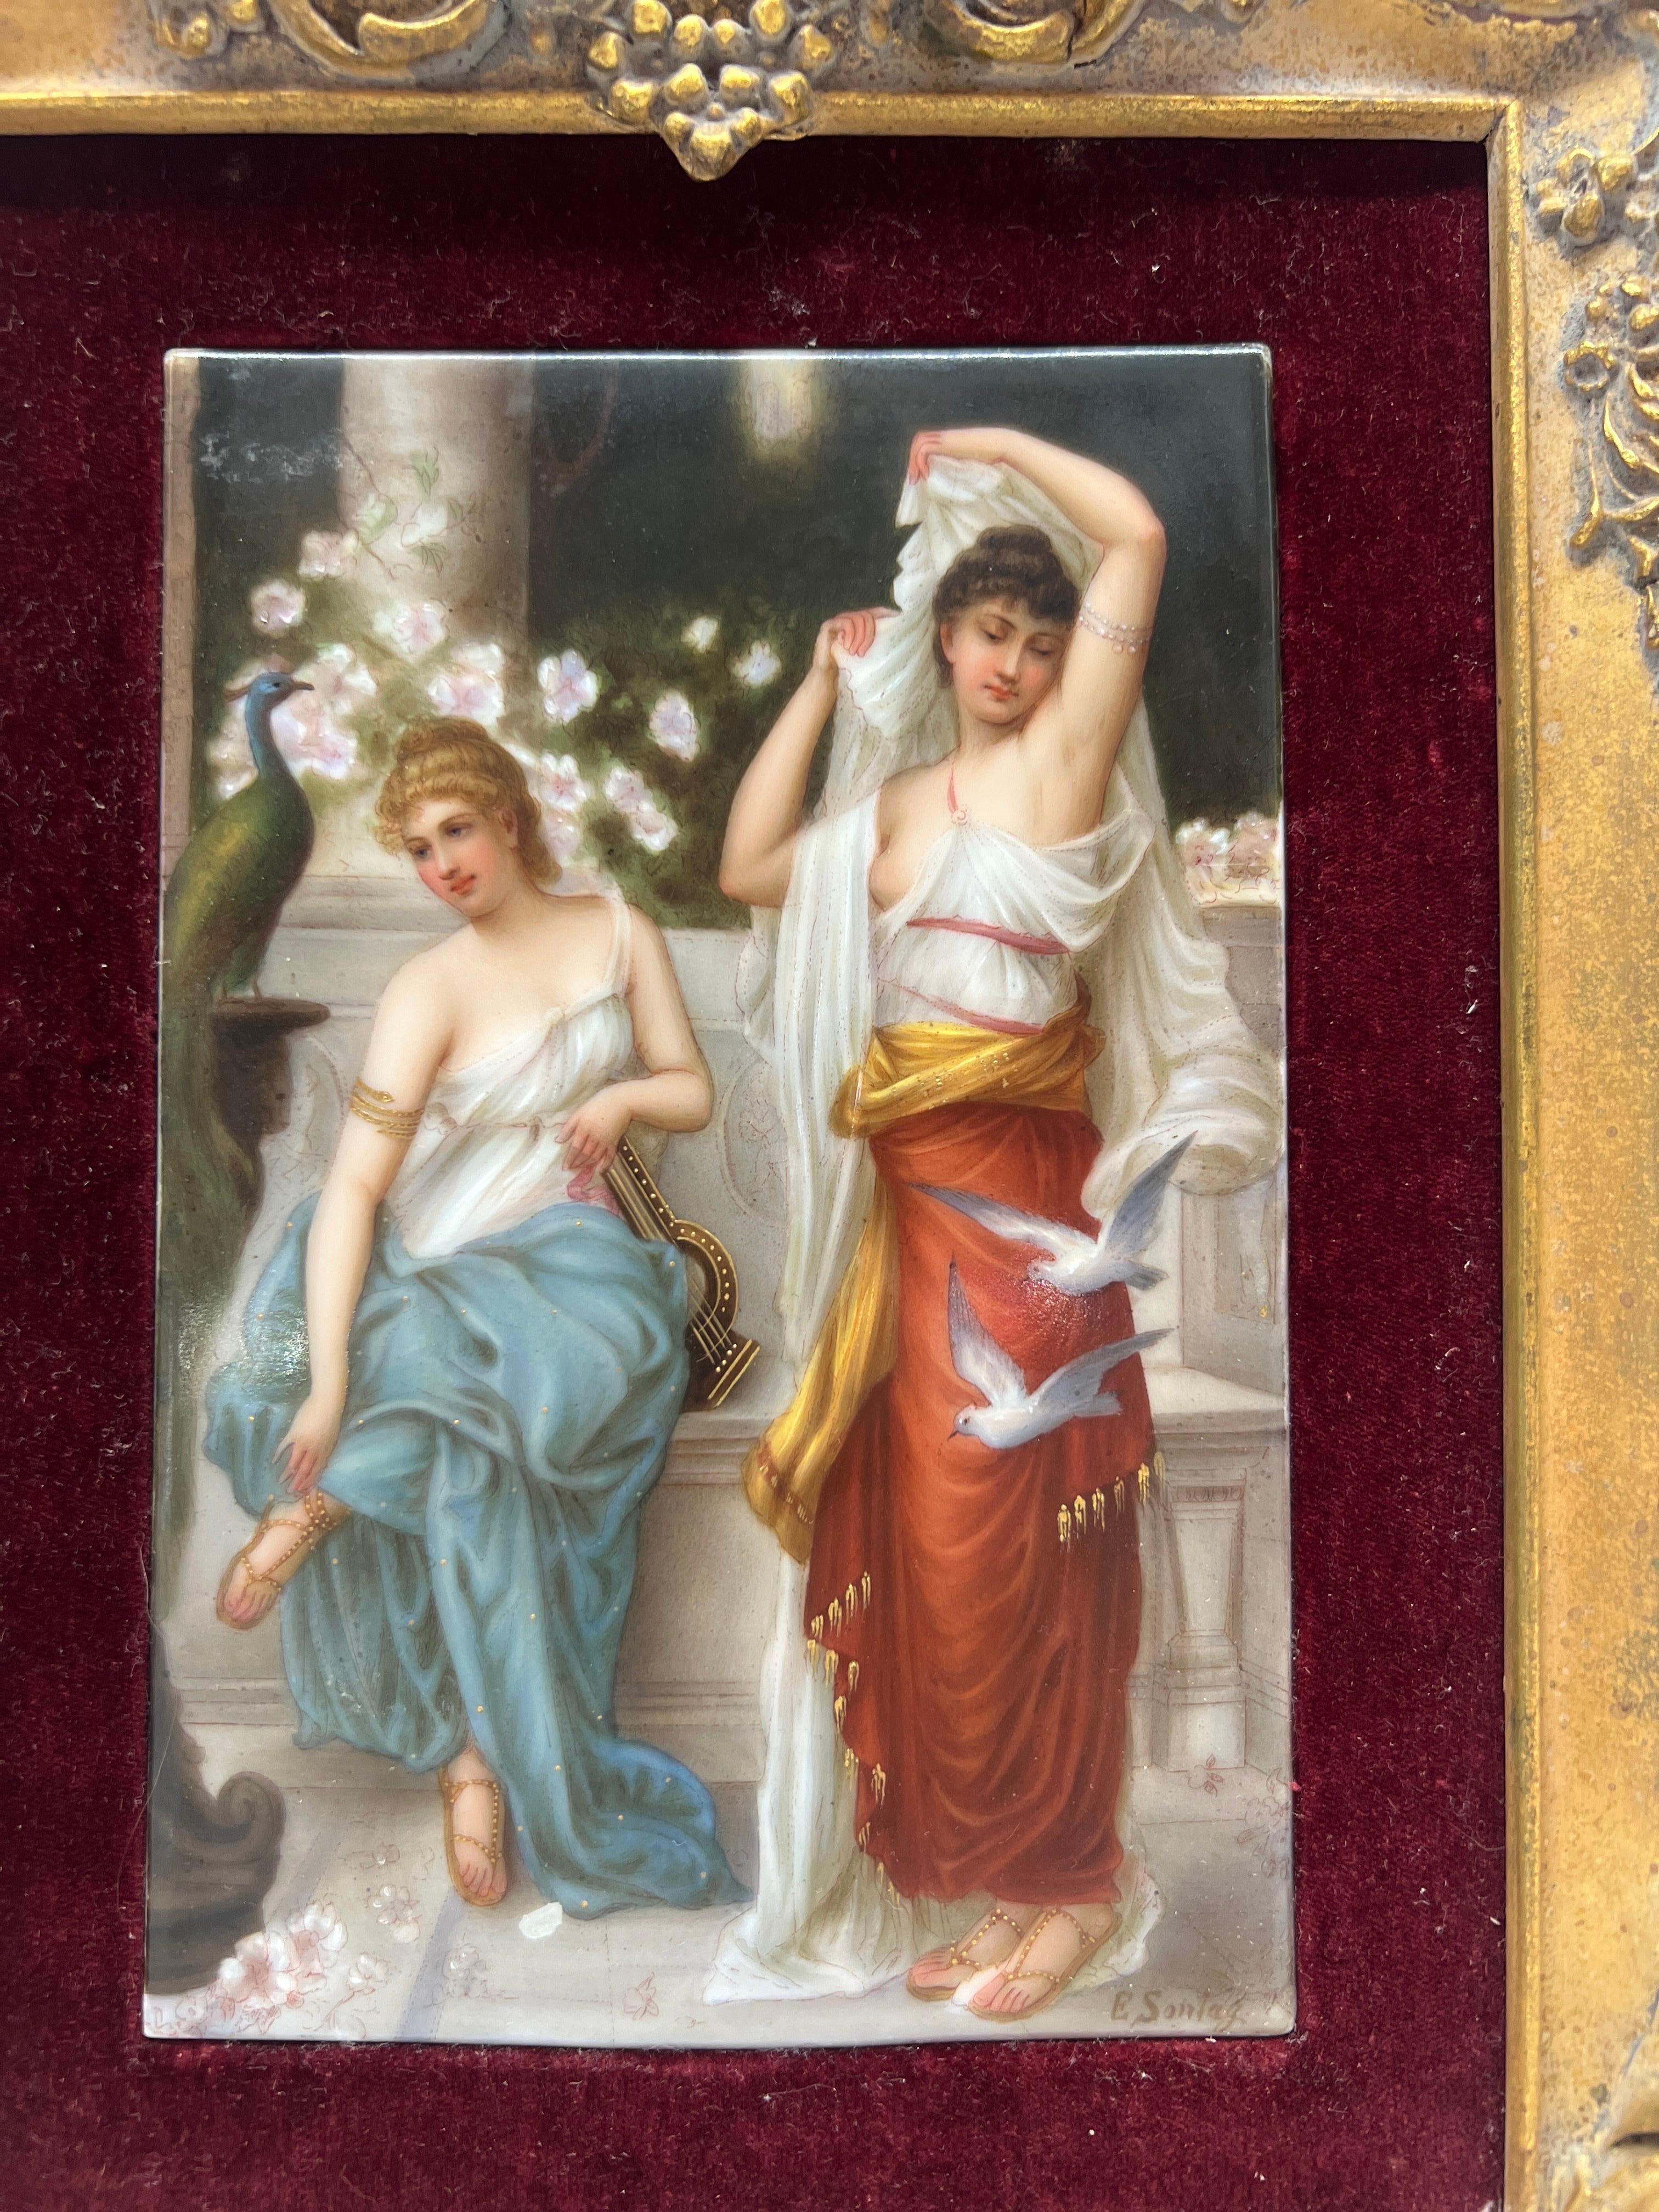 Italian, circa 1900.

A Firenze porcelain allegorical plaque depicting two extremely fine quality graces draped in beautiful dresses, flowers, gold accents to their clothing and shoes in addition to the doves flying past. Signed to the lower right